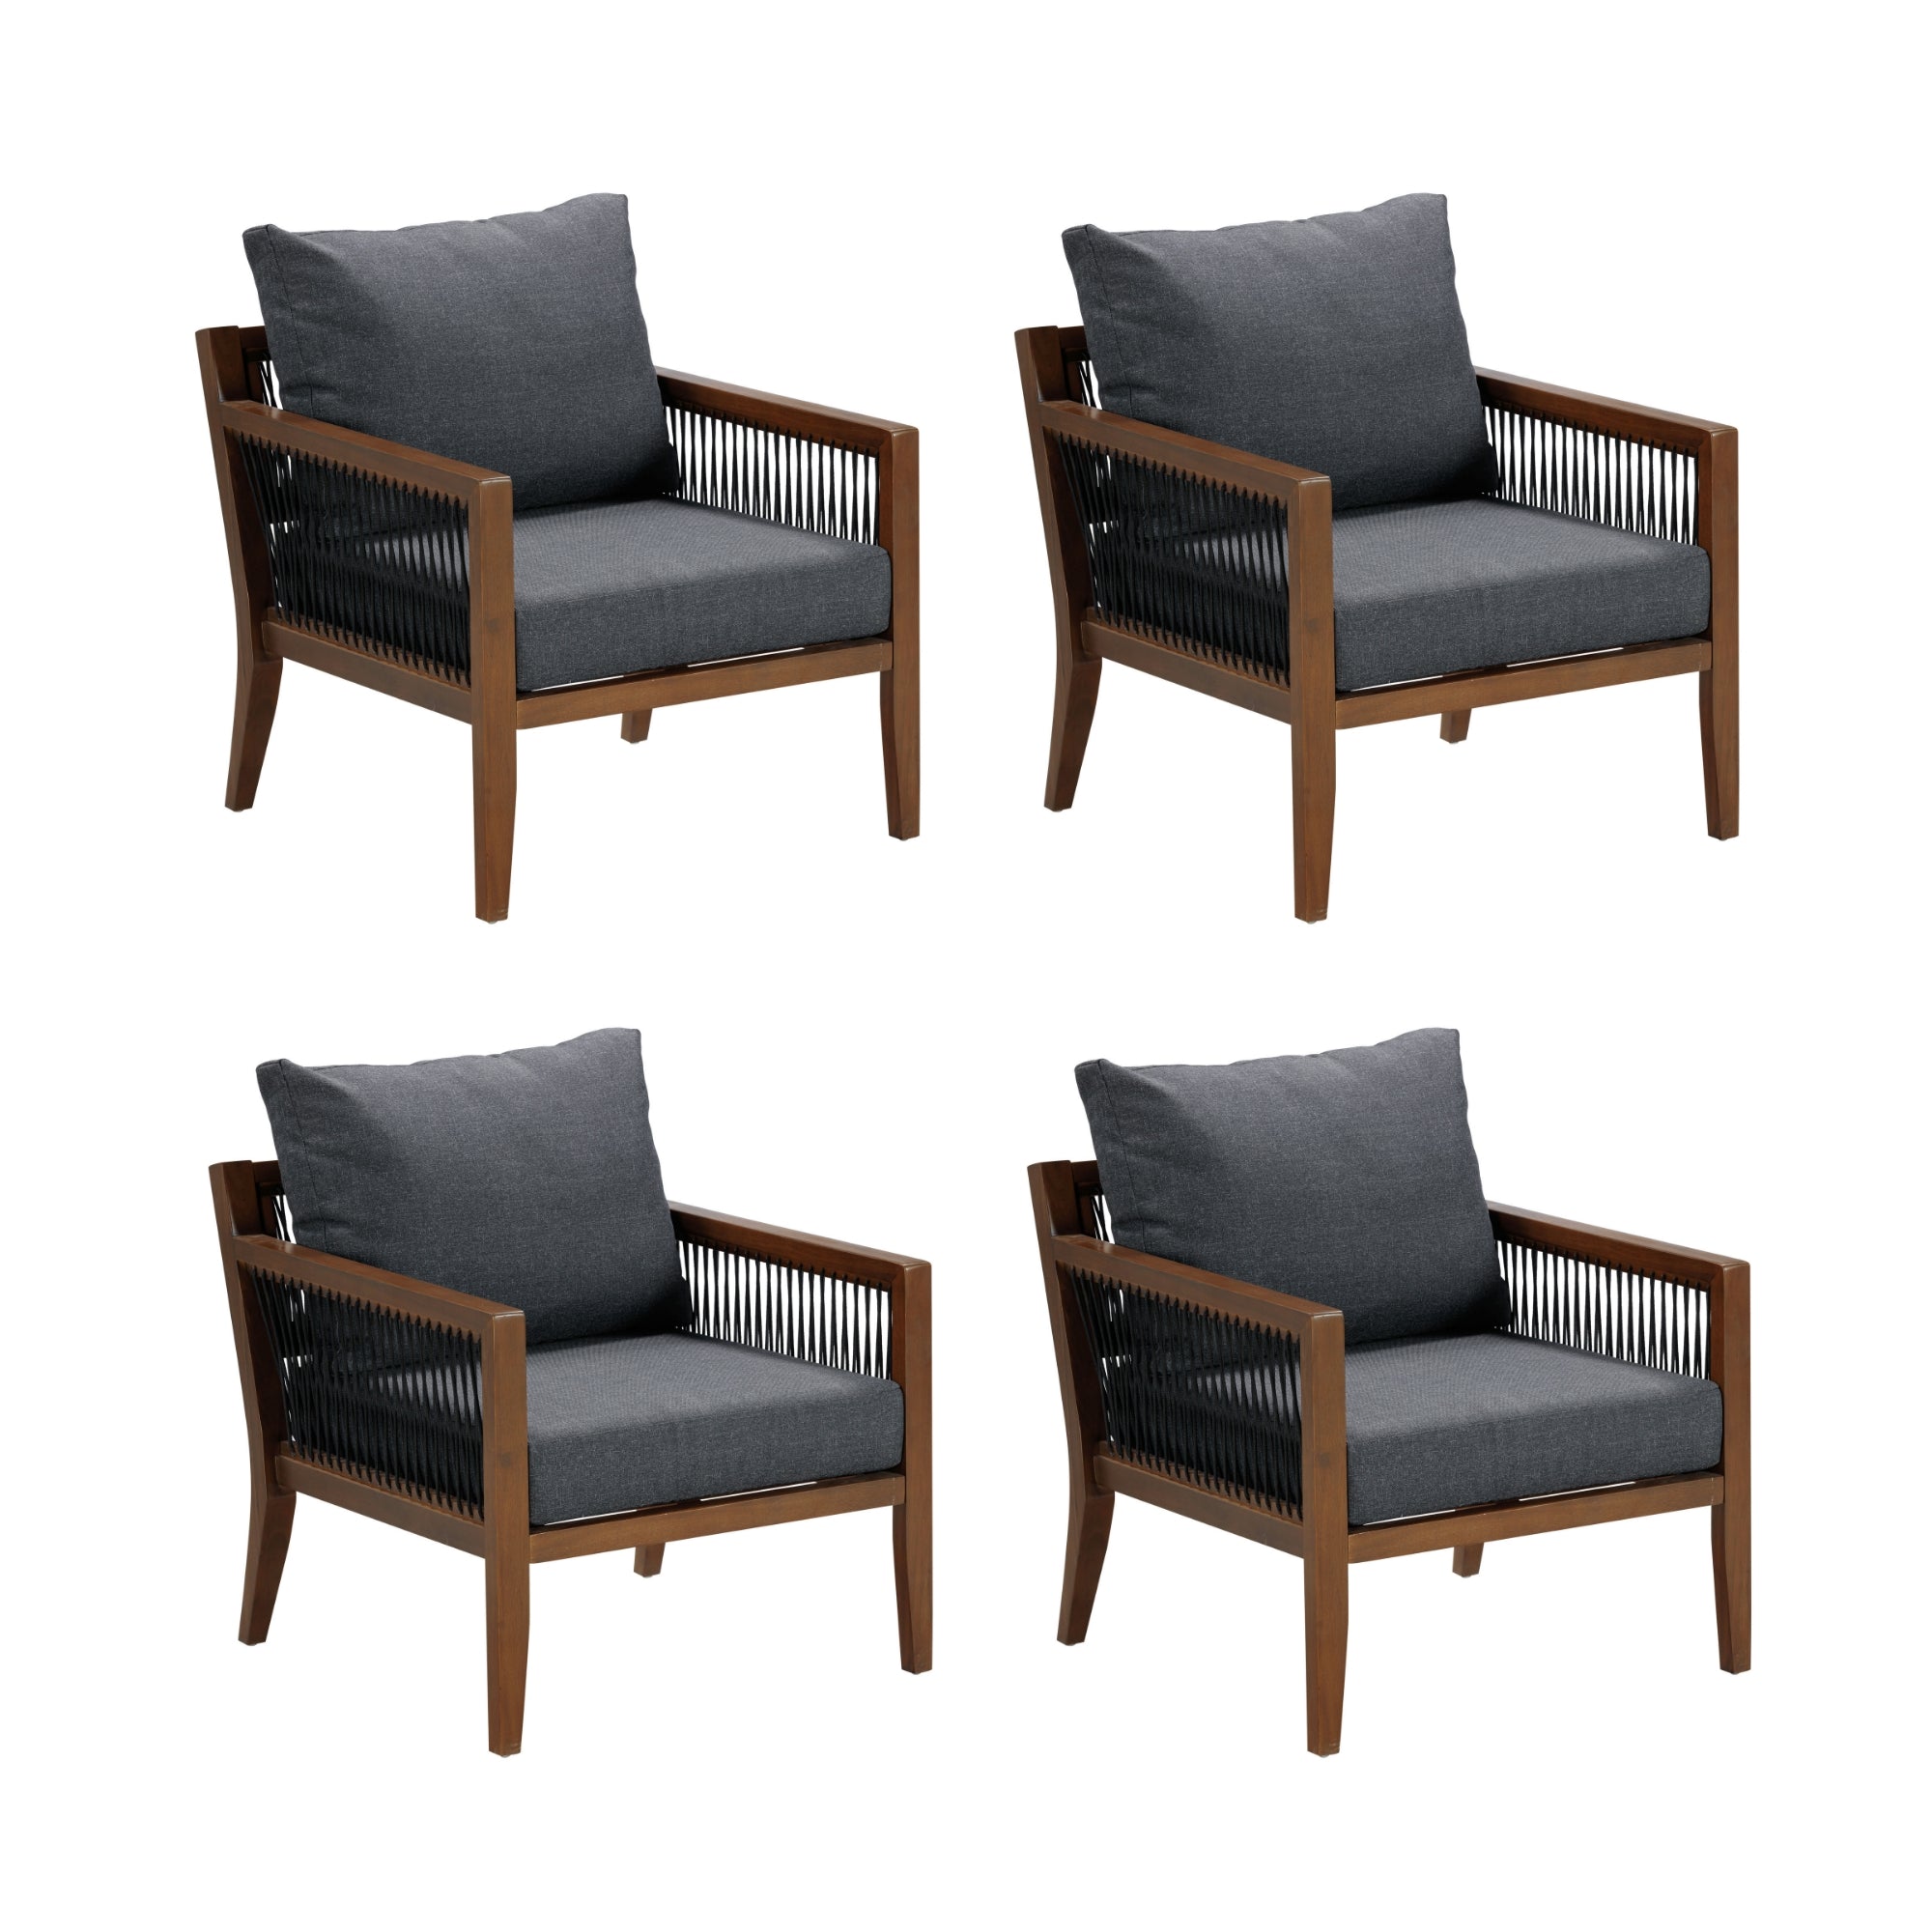 Set of 4 Outdoor Patio Arm Chairs Gray